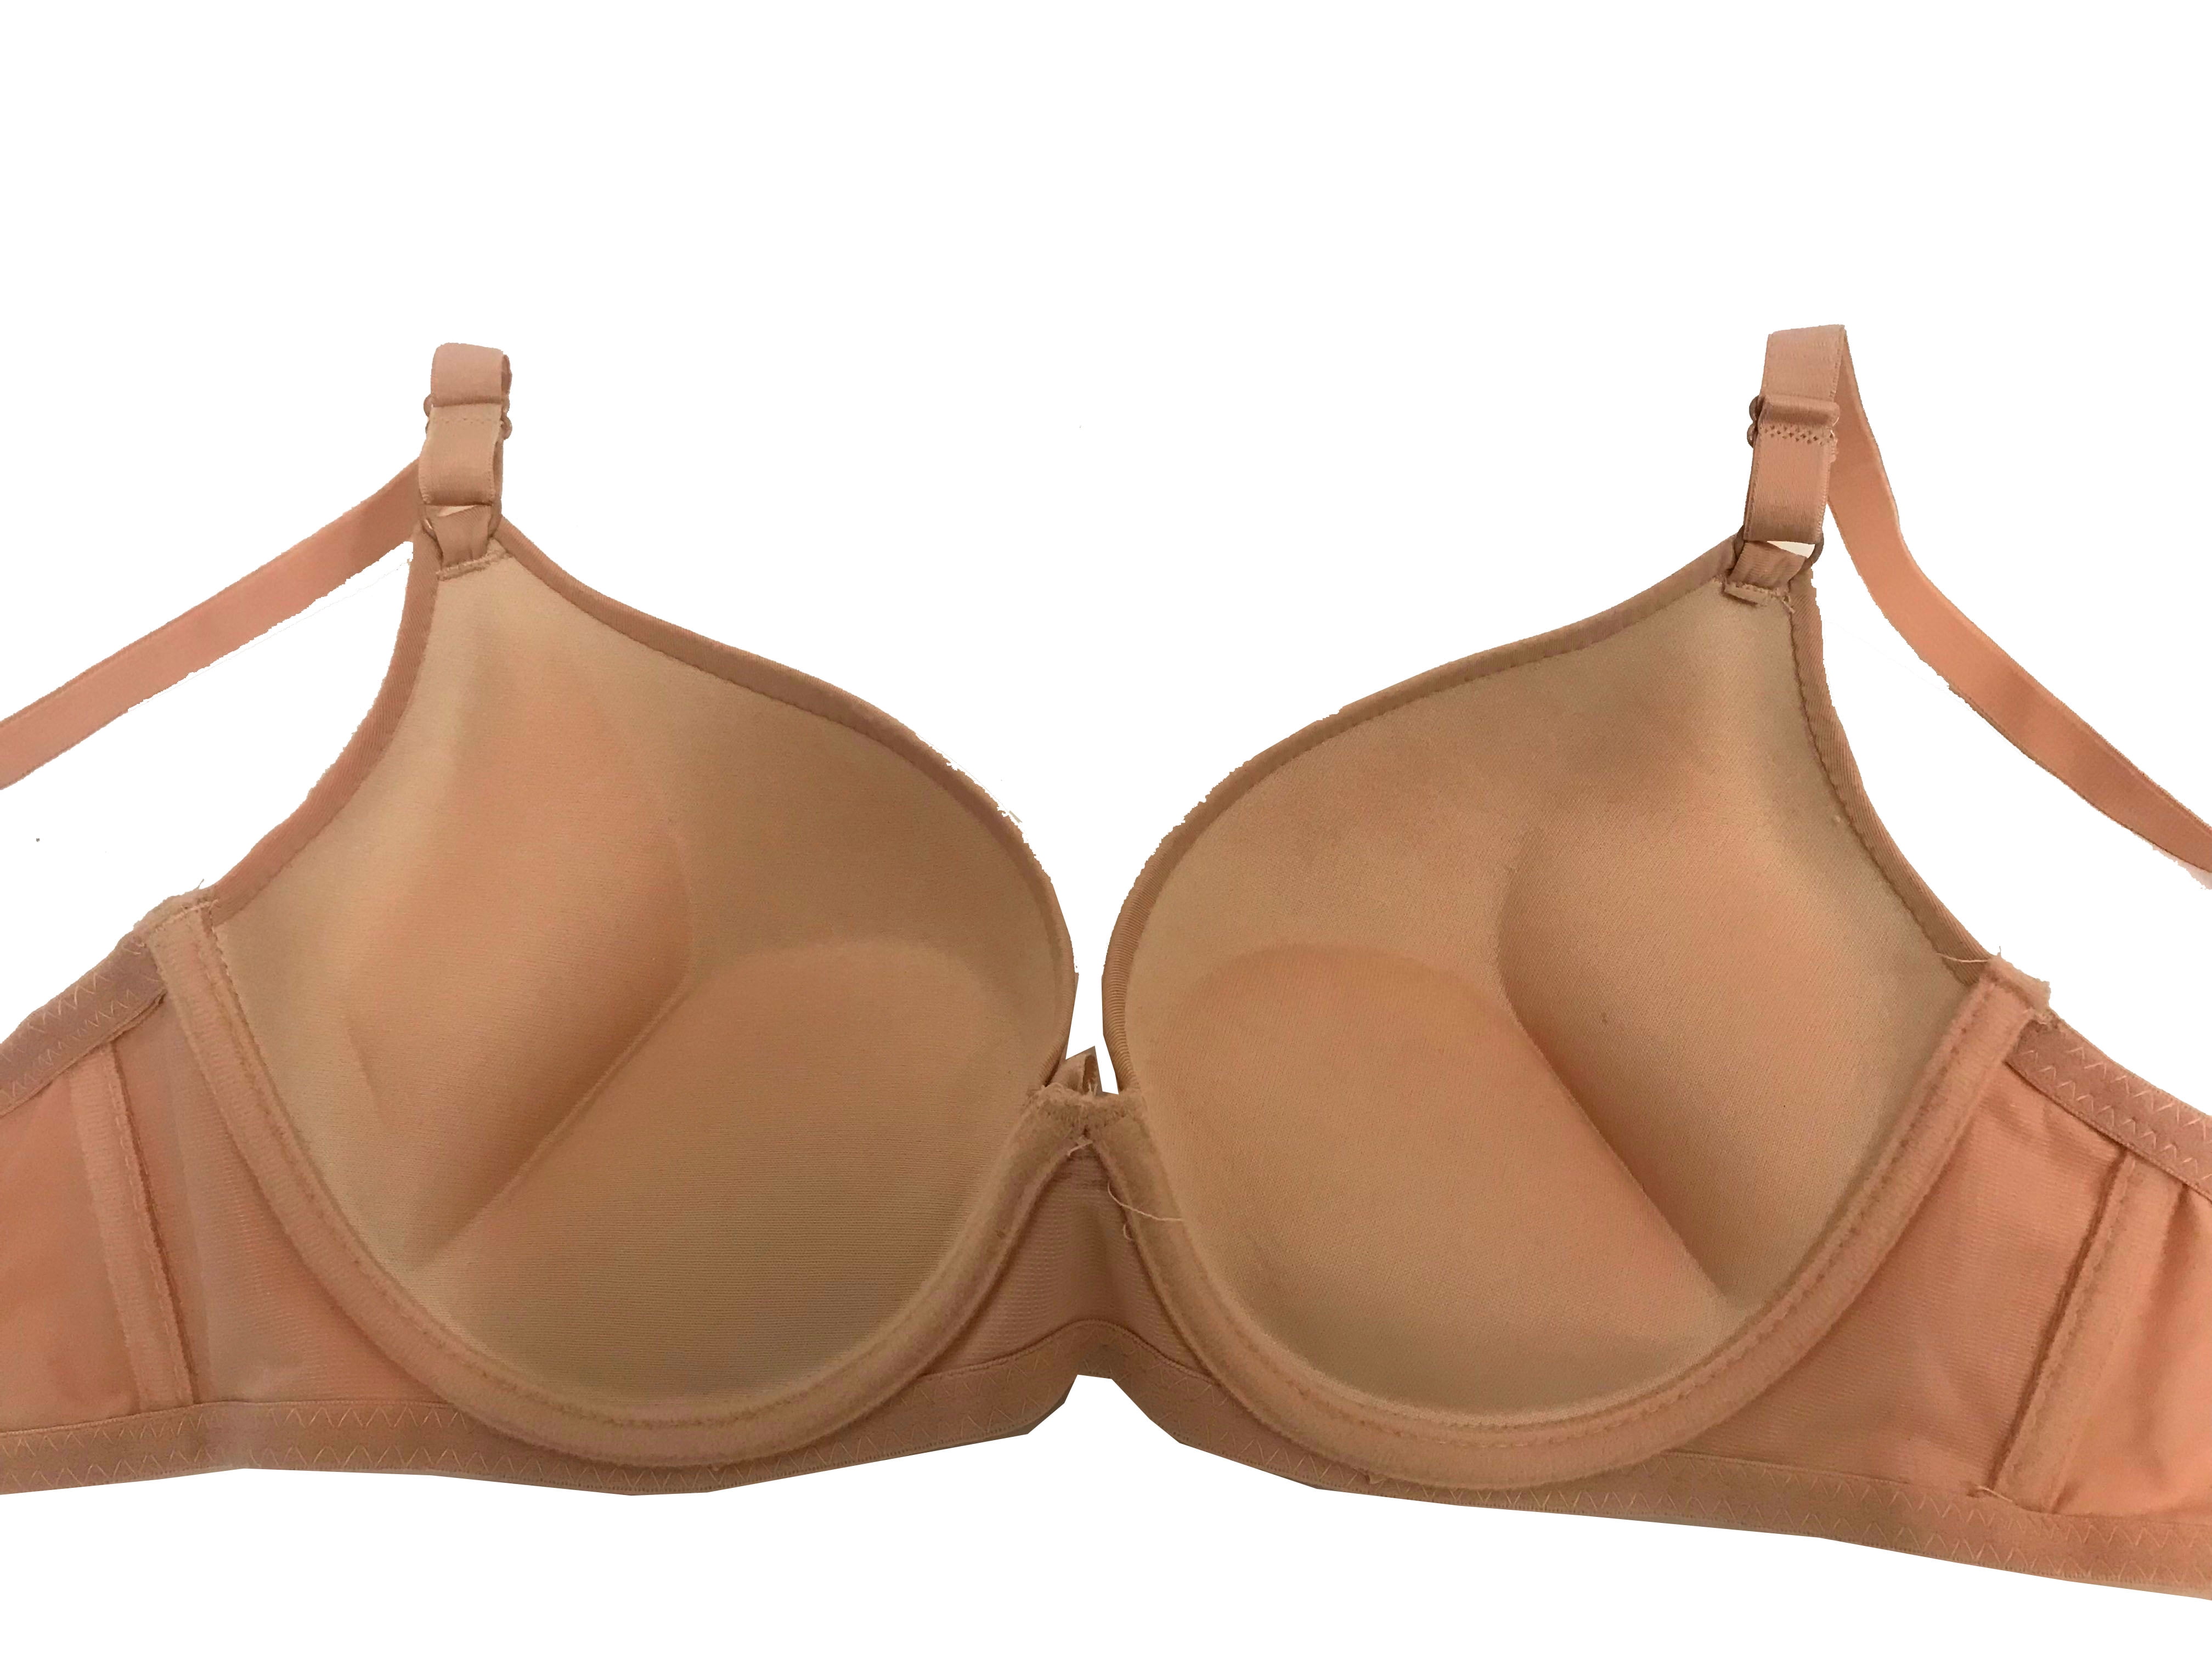 Women Bras 6 Pack of Double Pushup Basic Color Plain Bra B cup C cup Size  34C (9902) 